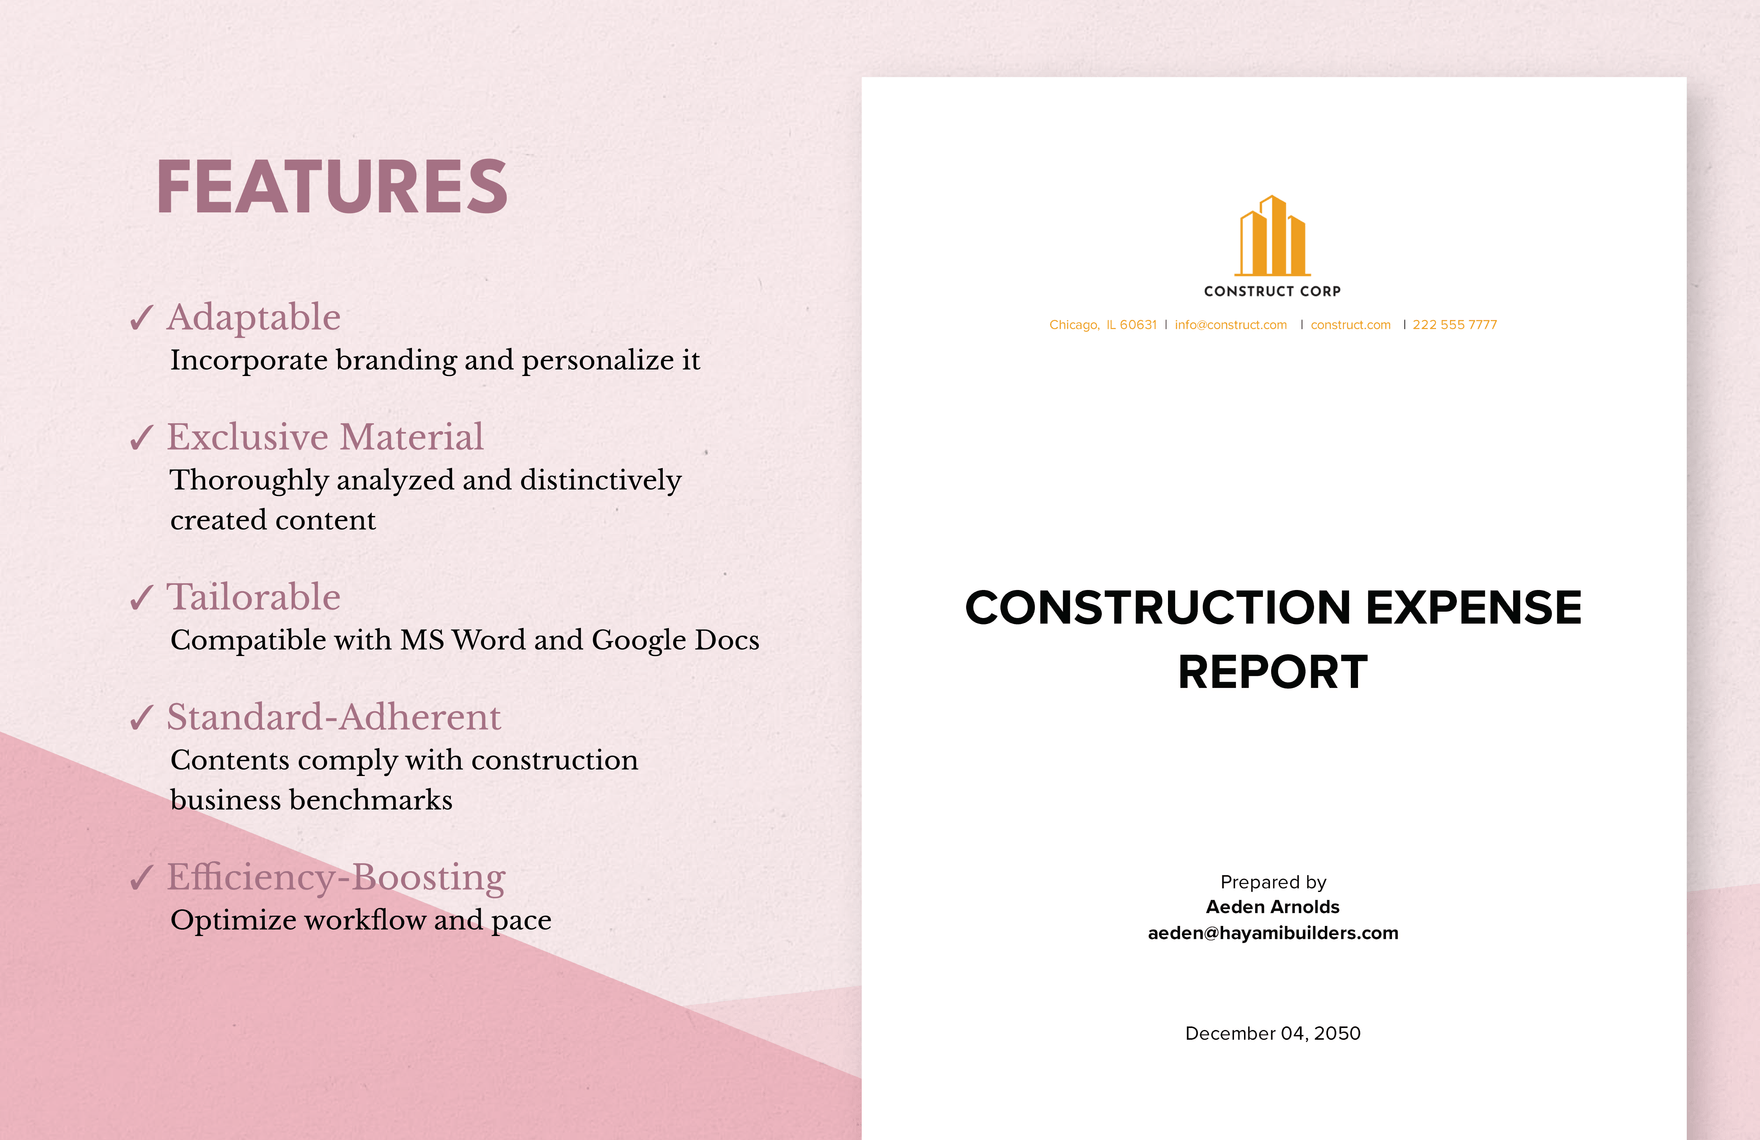 Construction Expense Report Template